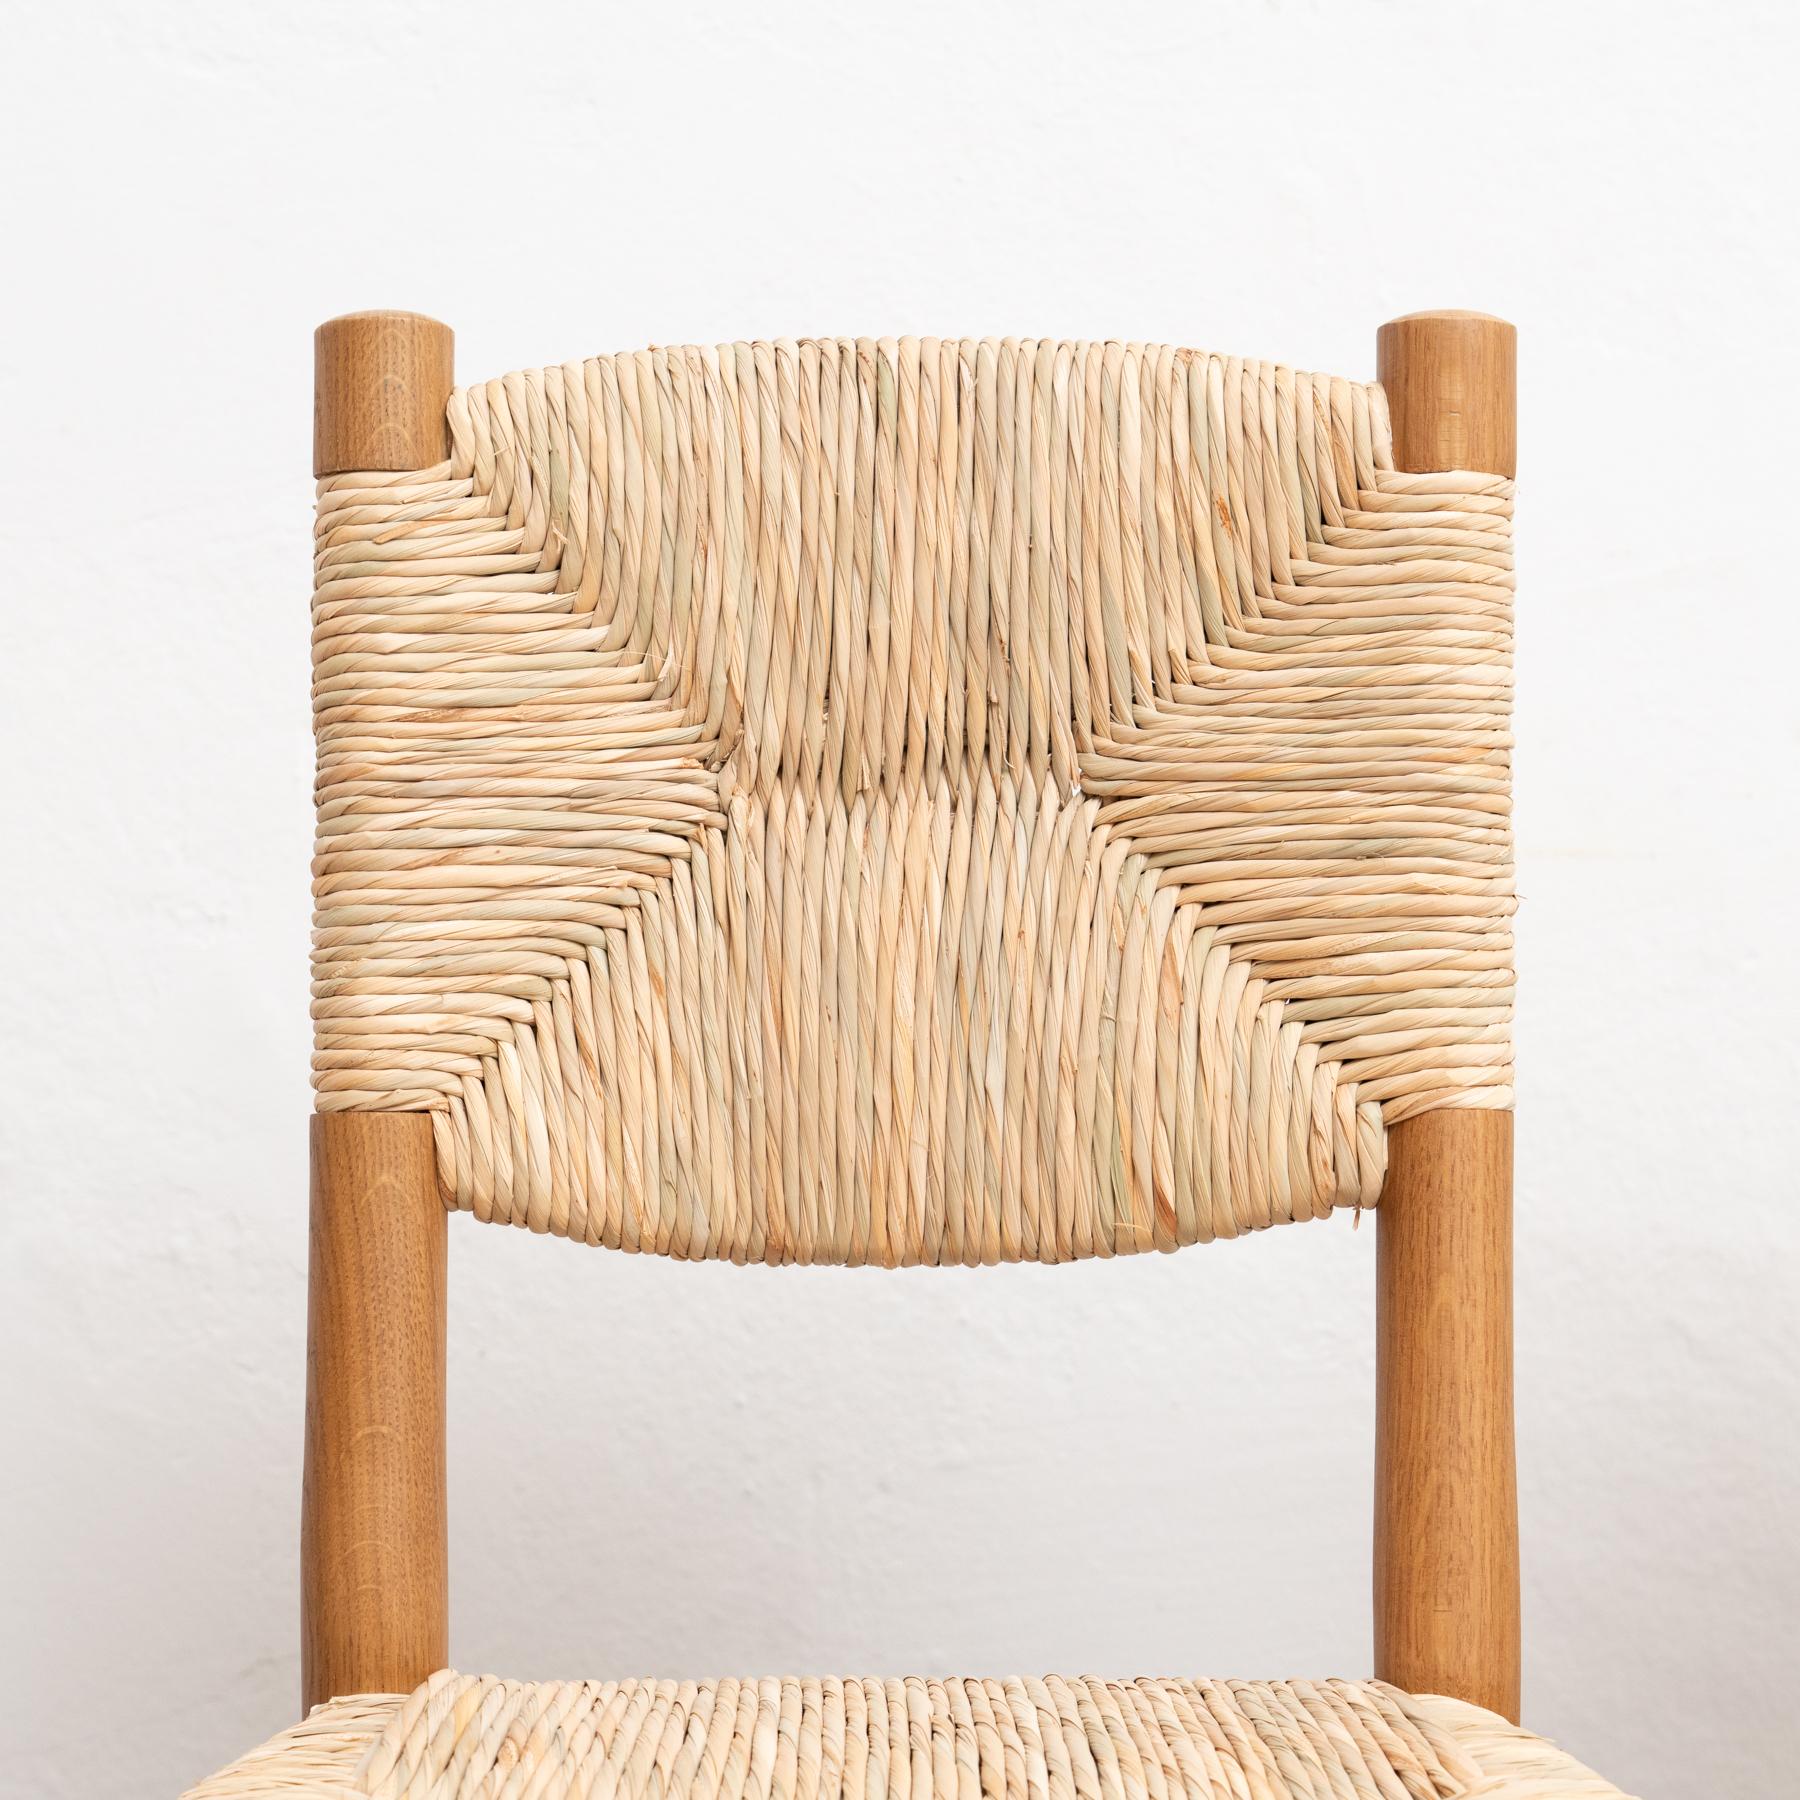 Set of 6 After Charlotte Perriand n.19 Chairs, Wood Rattan, Mid-Century Modern For Sale 3